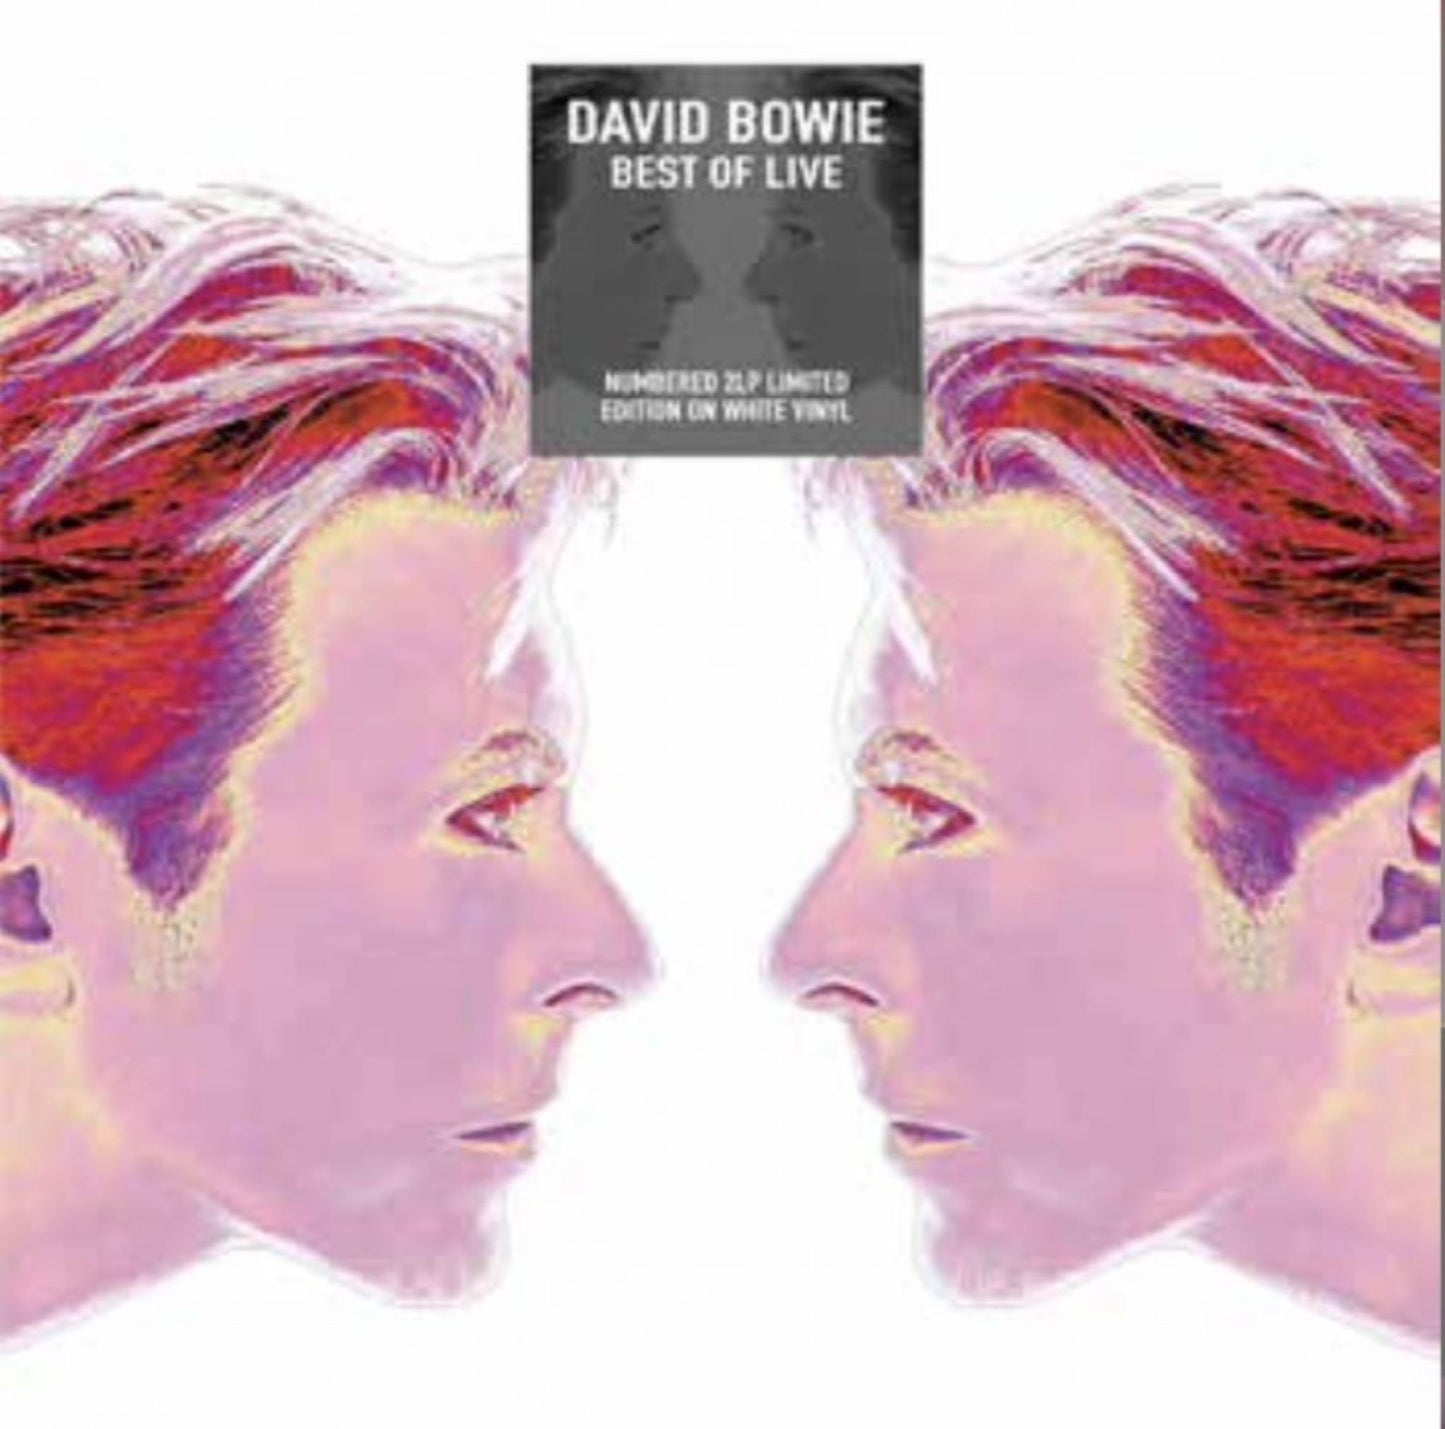 David Bowie - Best of Live (Limited Edition Numbered Double Album on 180g White Vinyl)